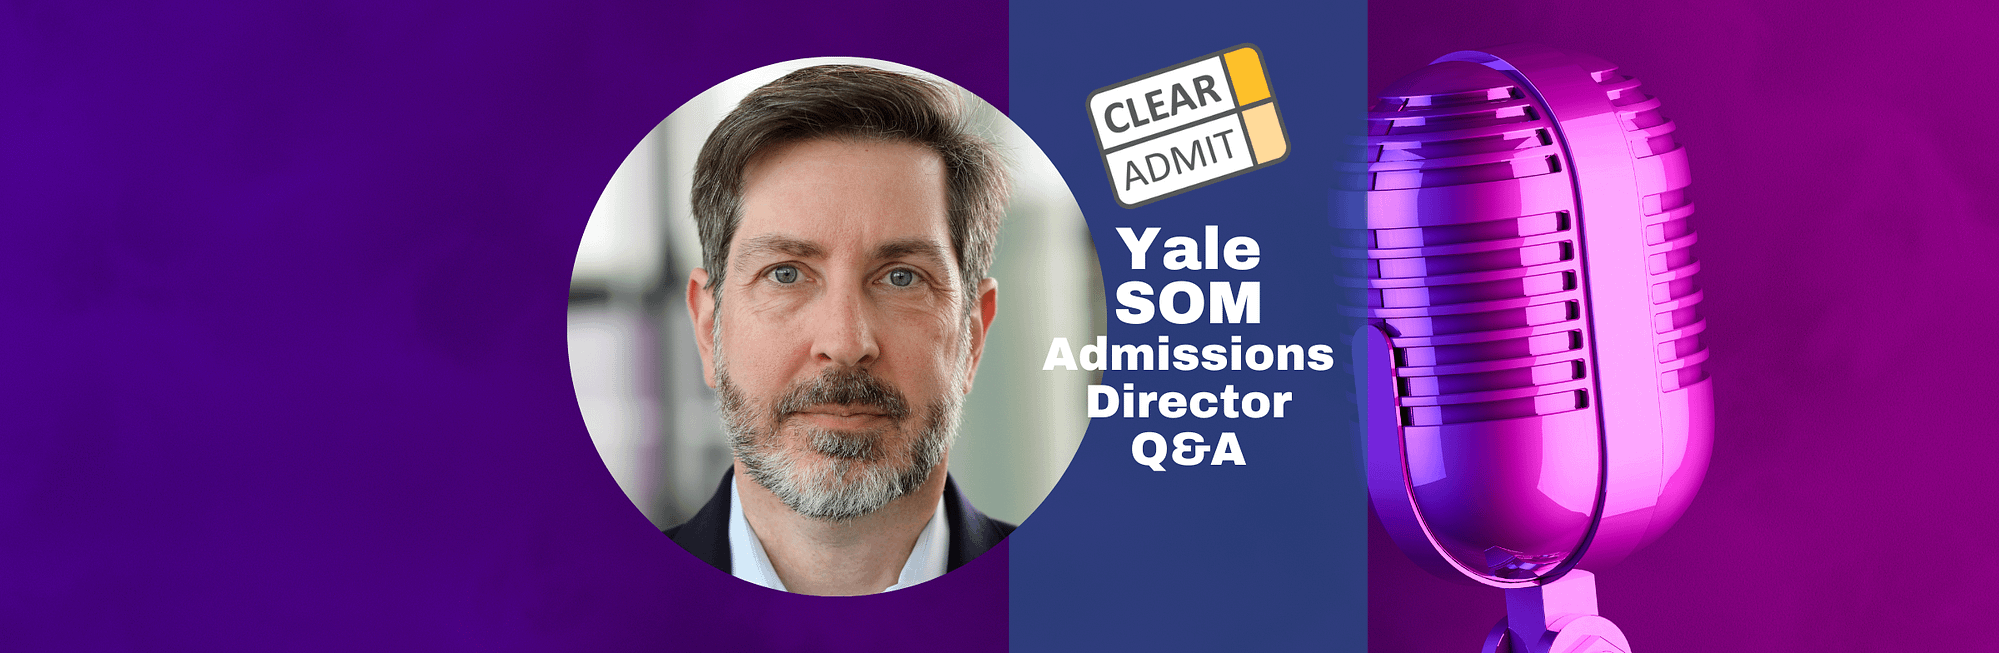 yale mba admissions